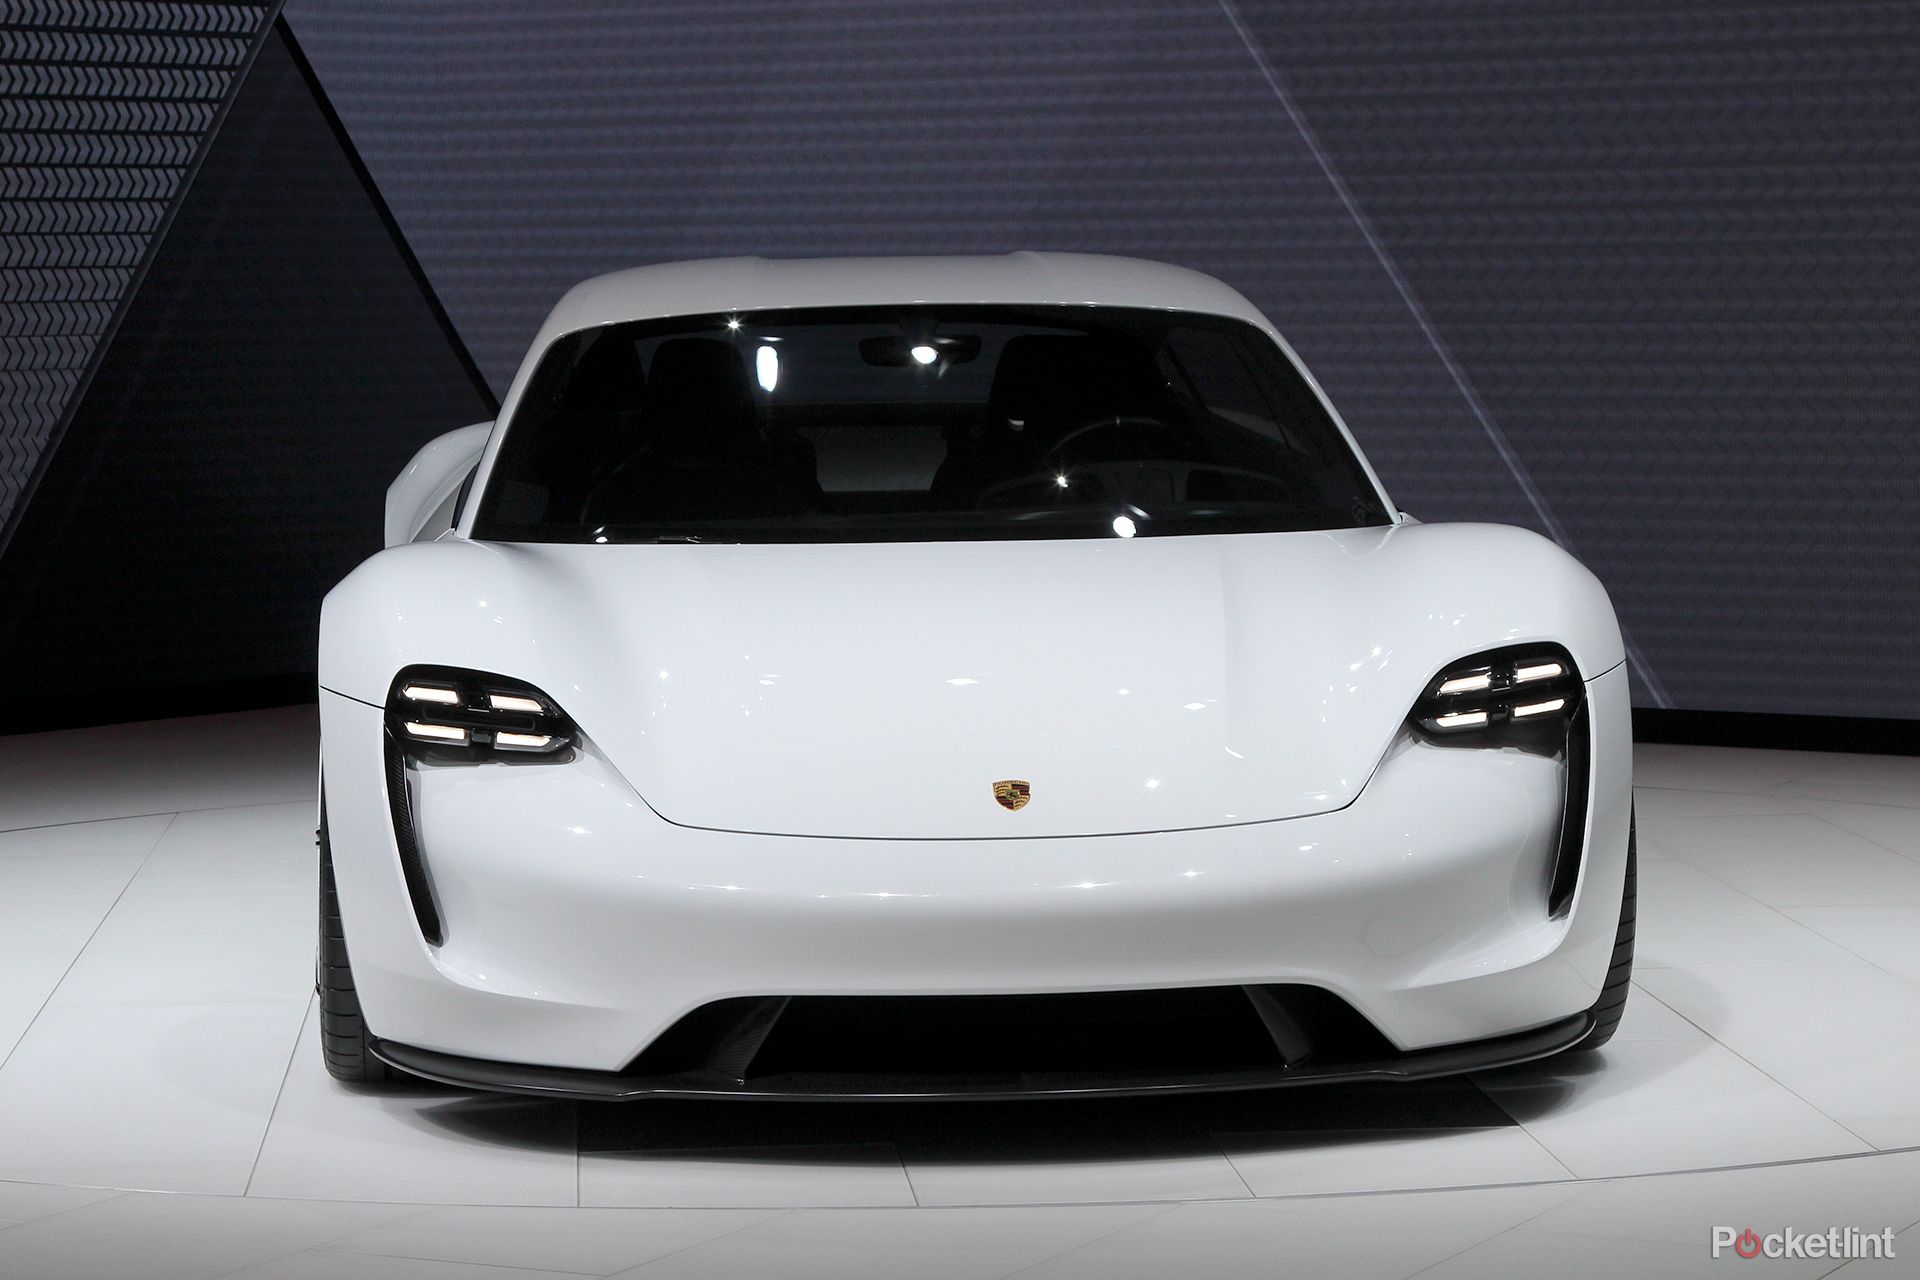 Porsche Is Charging Ahead With Mission E 'Tesla Killer' Electric Car